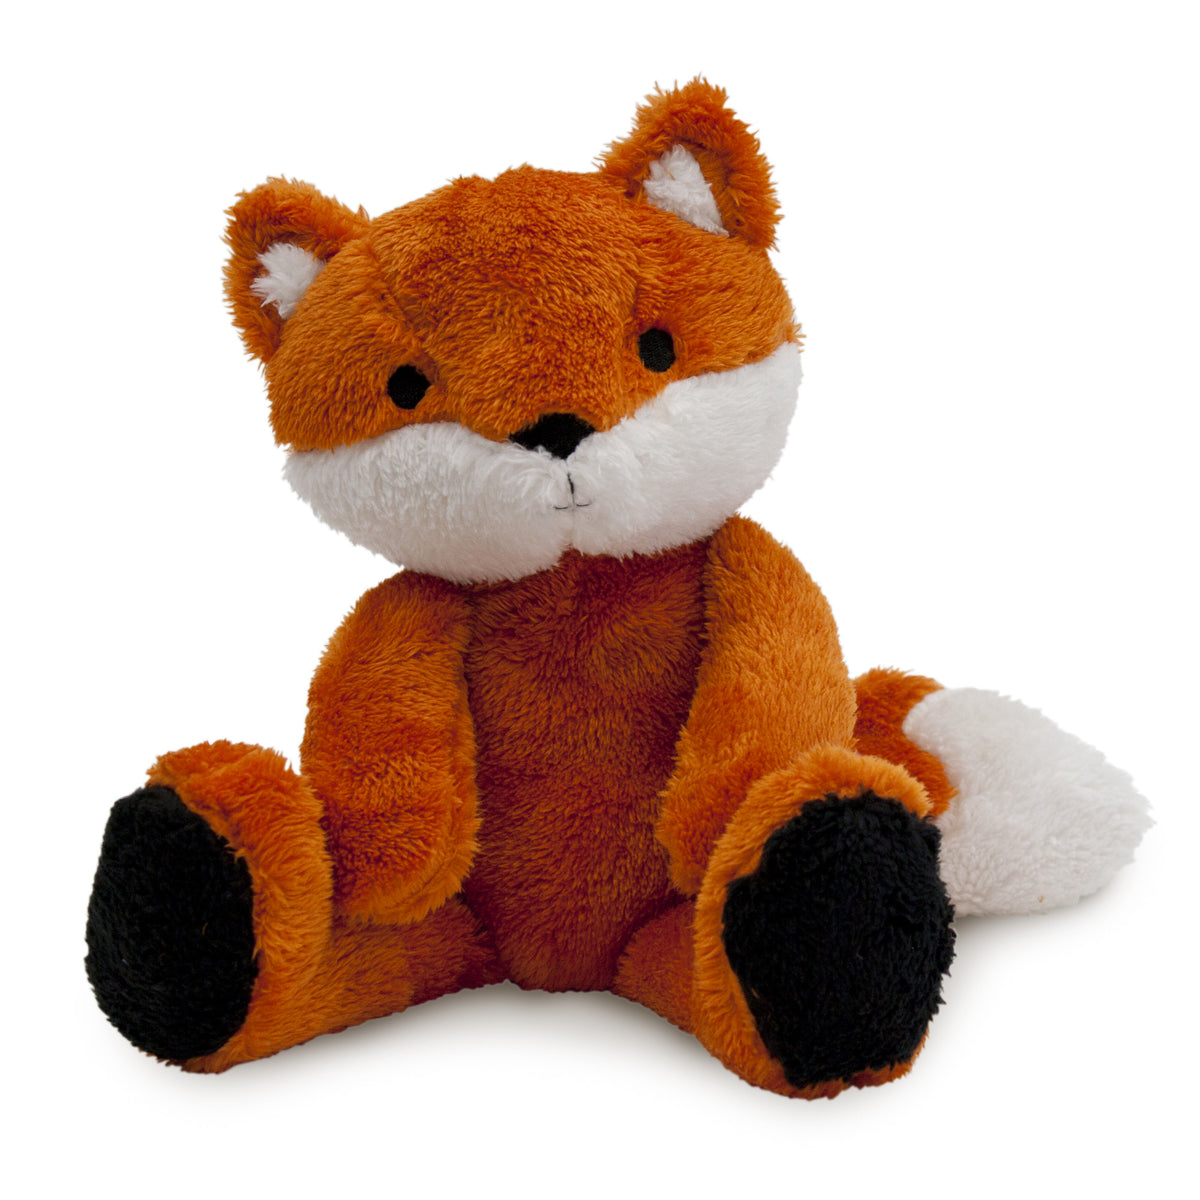 Cute and Safe garden plush, Perfect for Gifting 